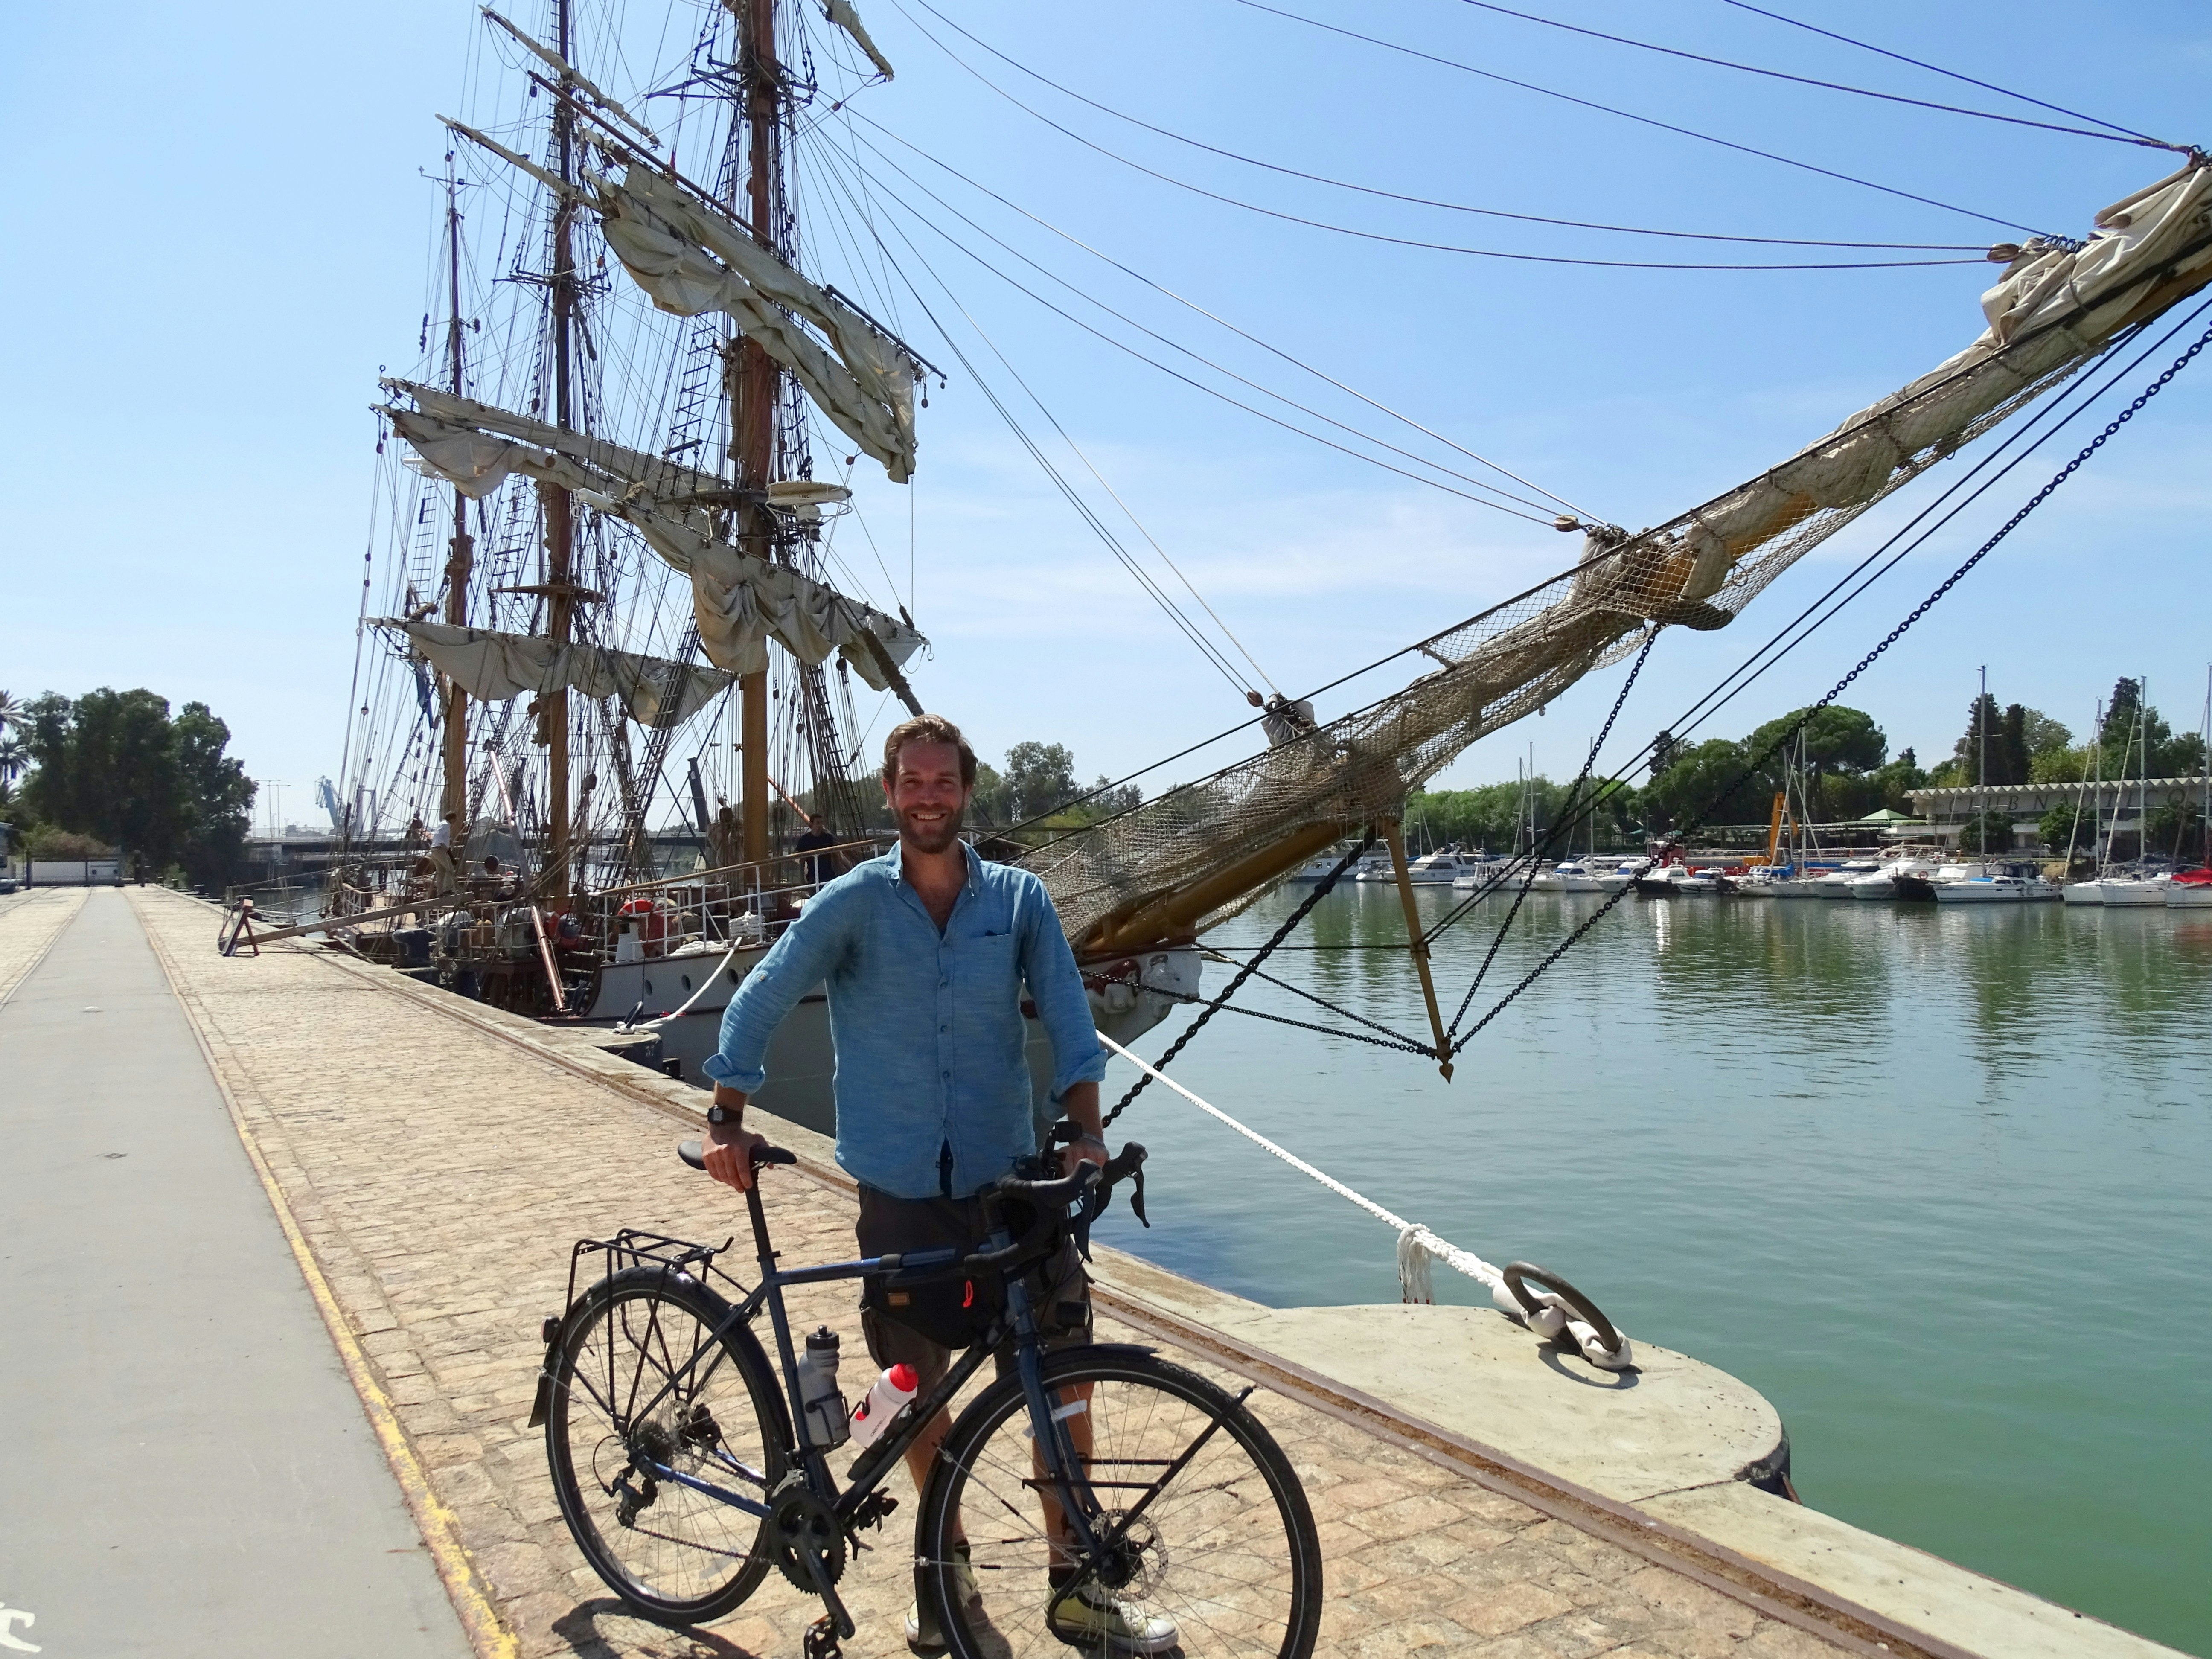 James stands with a bike on the water's edge next to a tall sailing ship. 